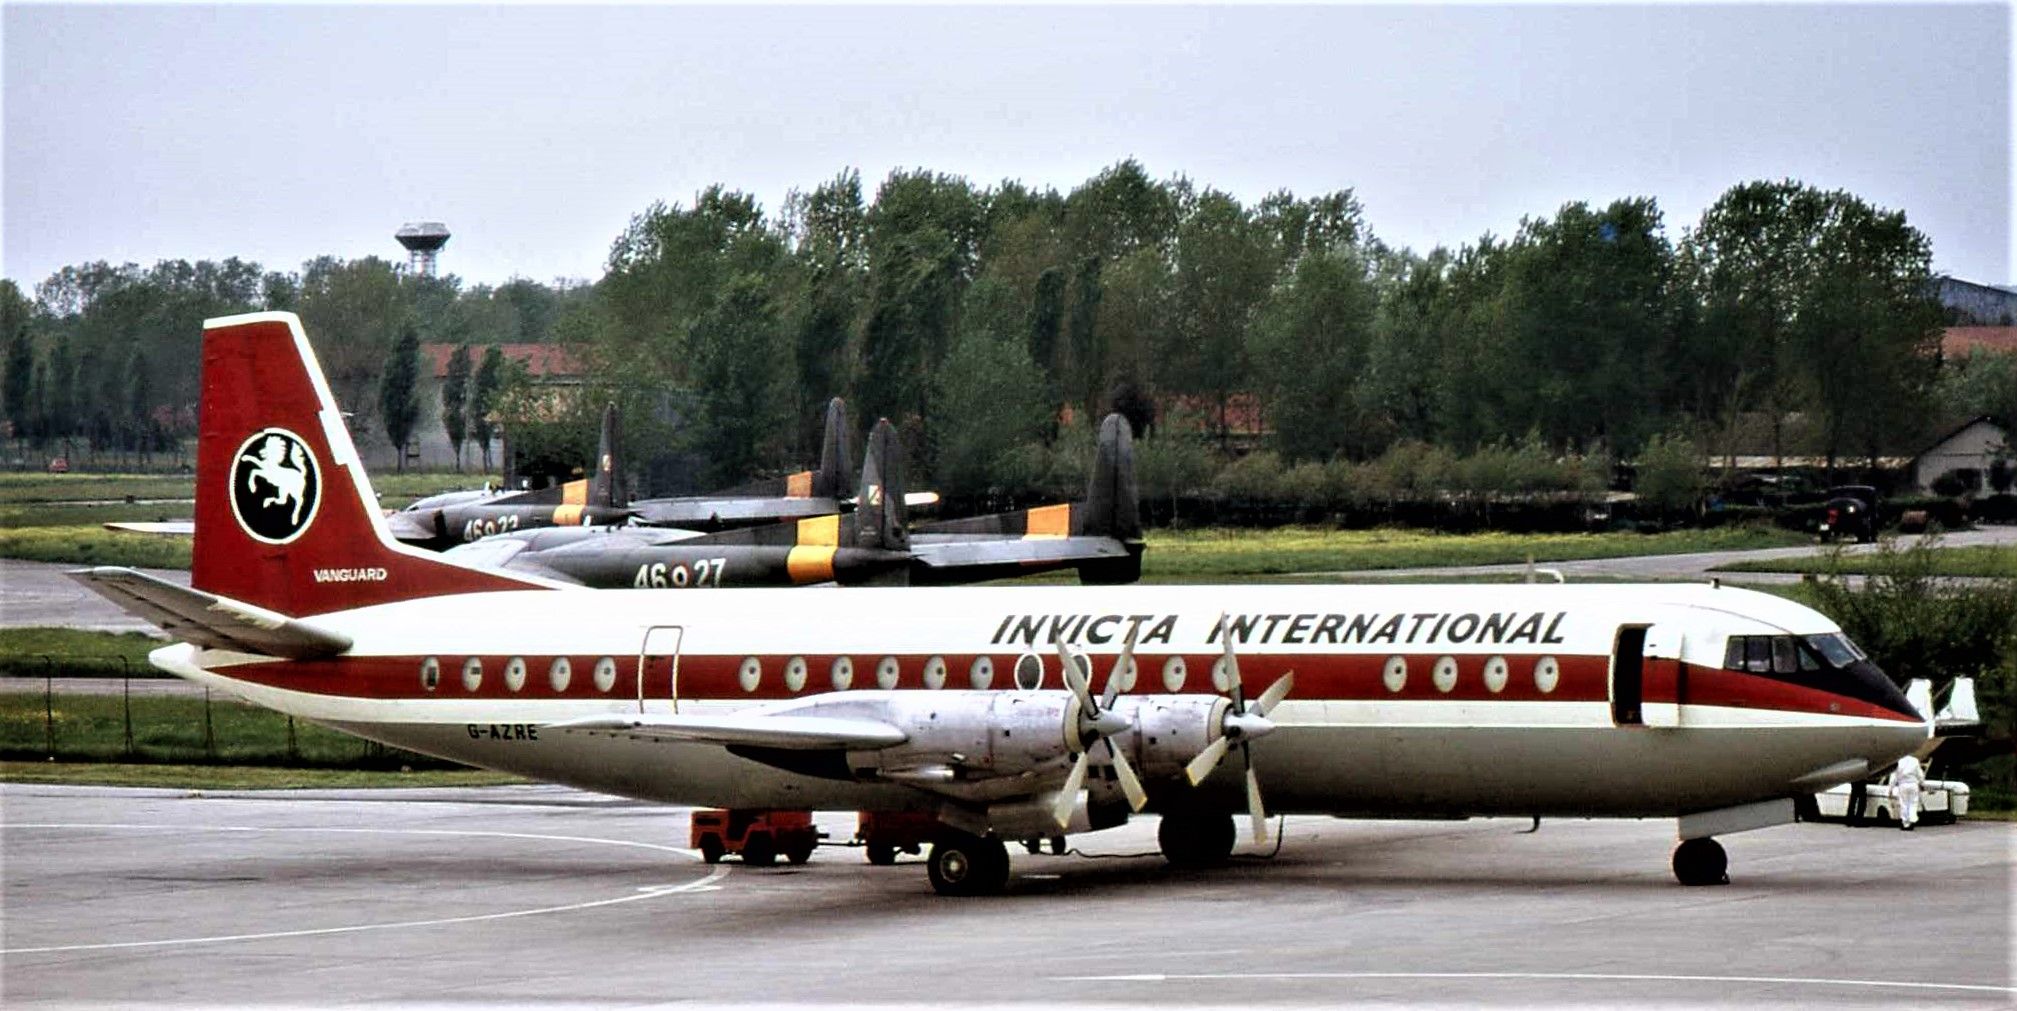 An Invicta International Vanguard , registration G-AZRE, parked at an airfield.